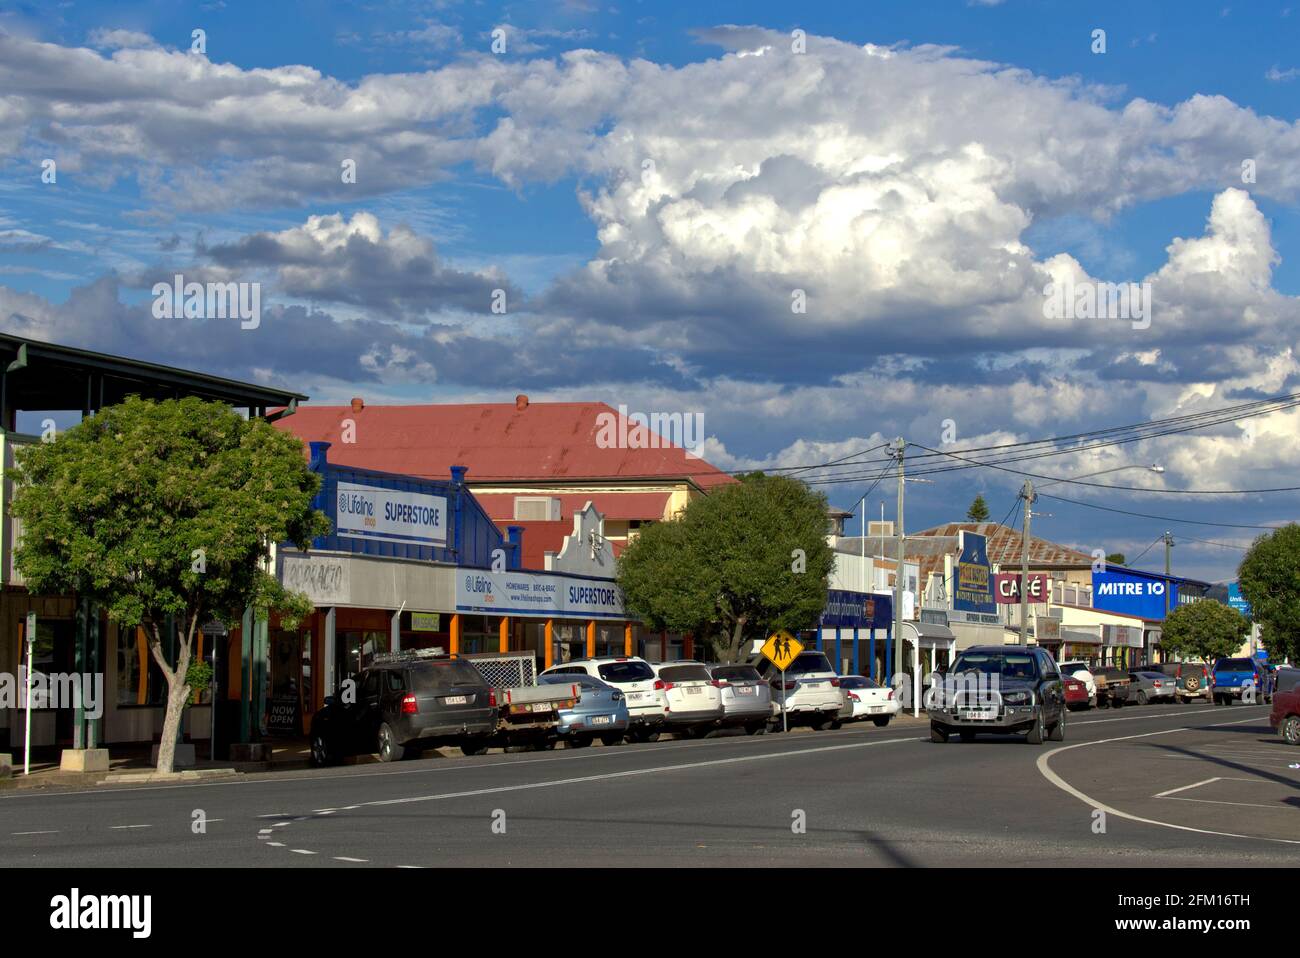 Capper Street High Resolution Stock Photography and Images - Alamy